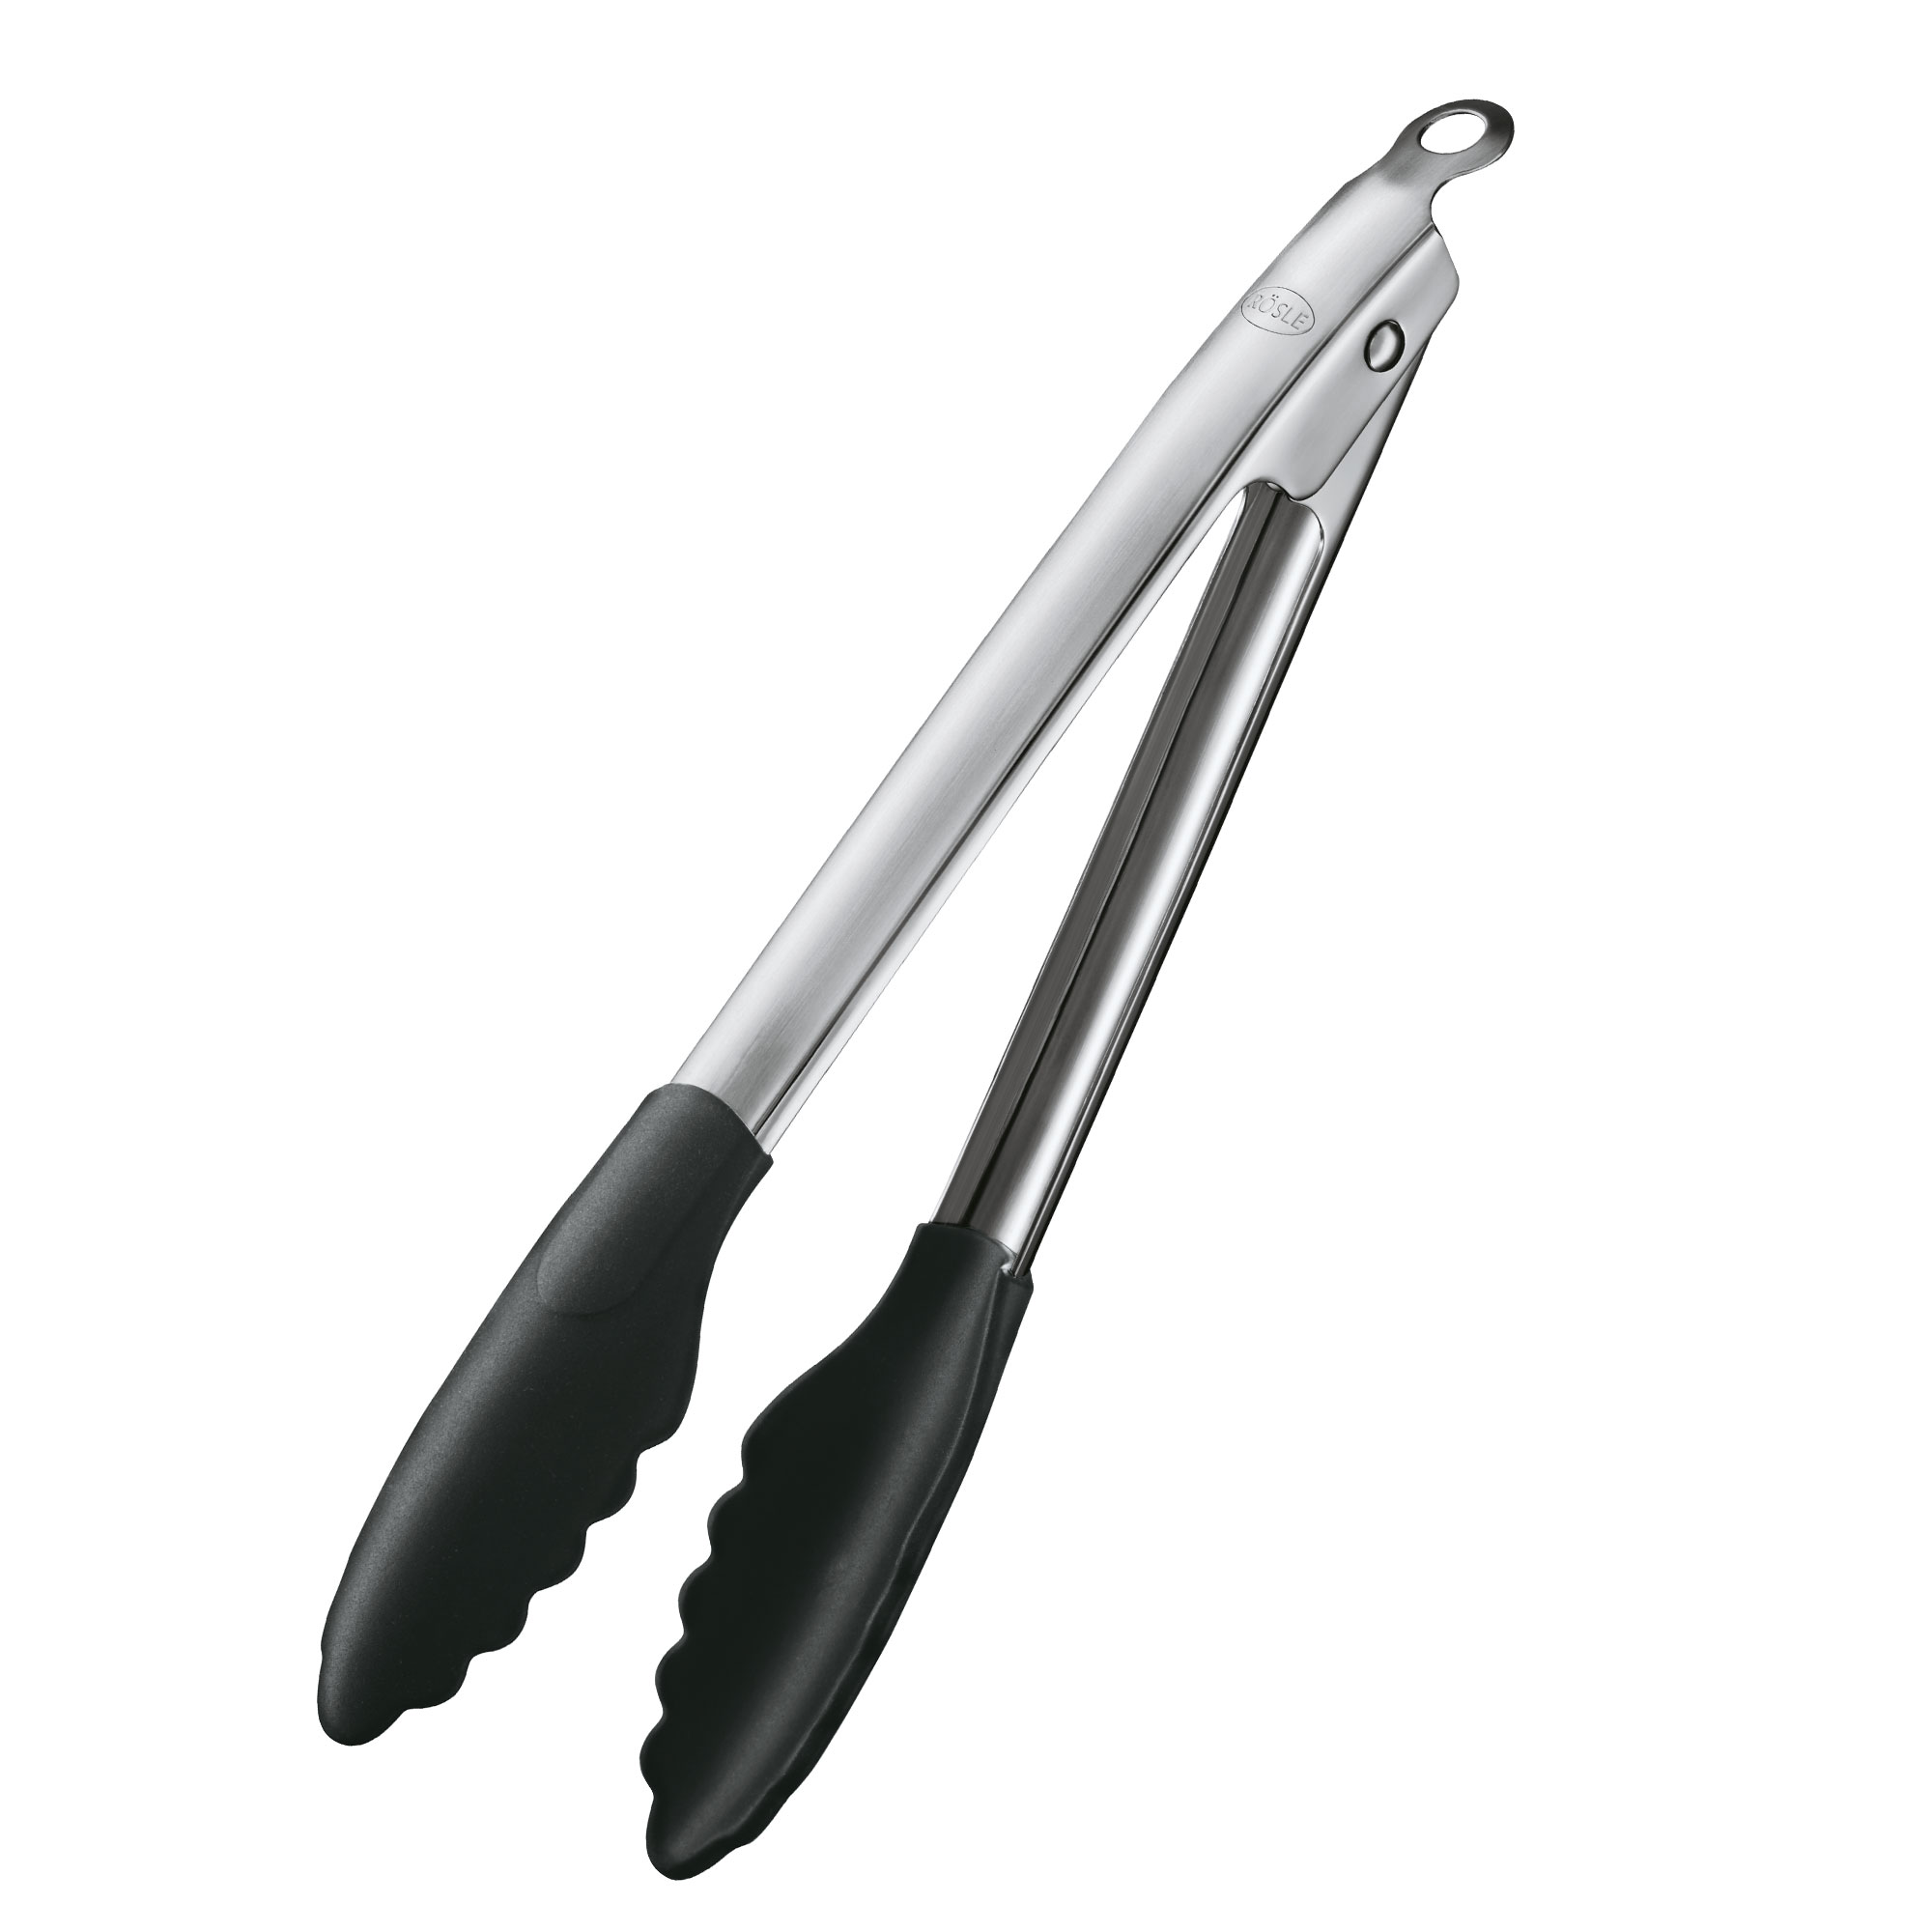 Locking Tongs silicone 23 cm|9.1 in.